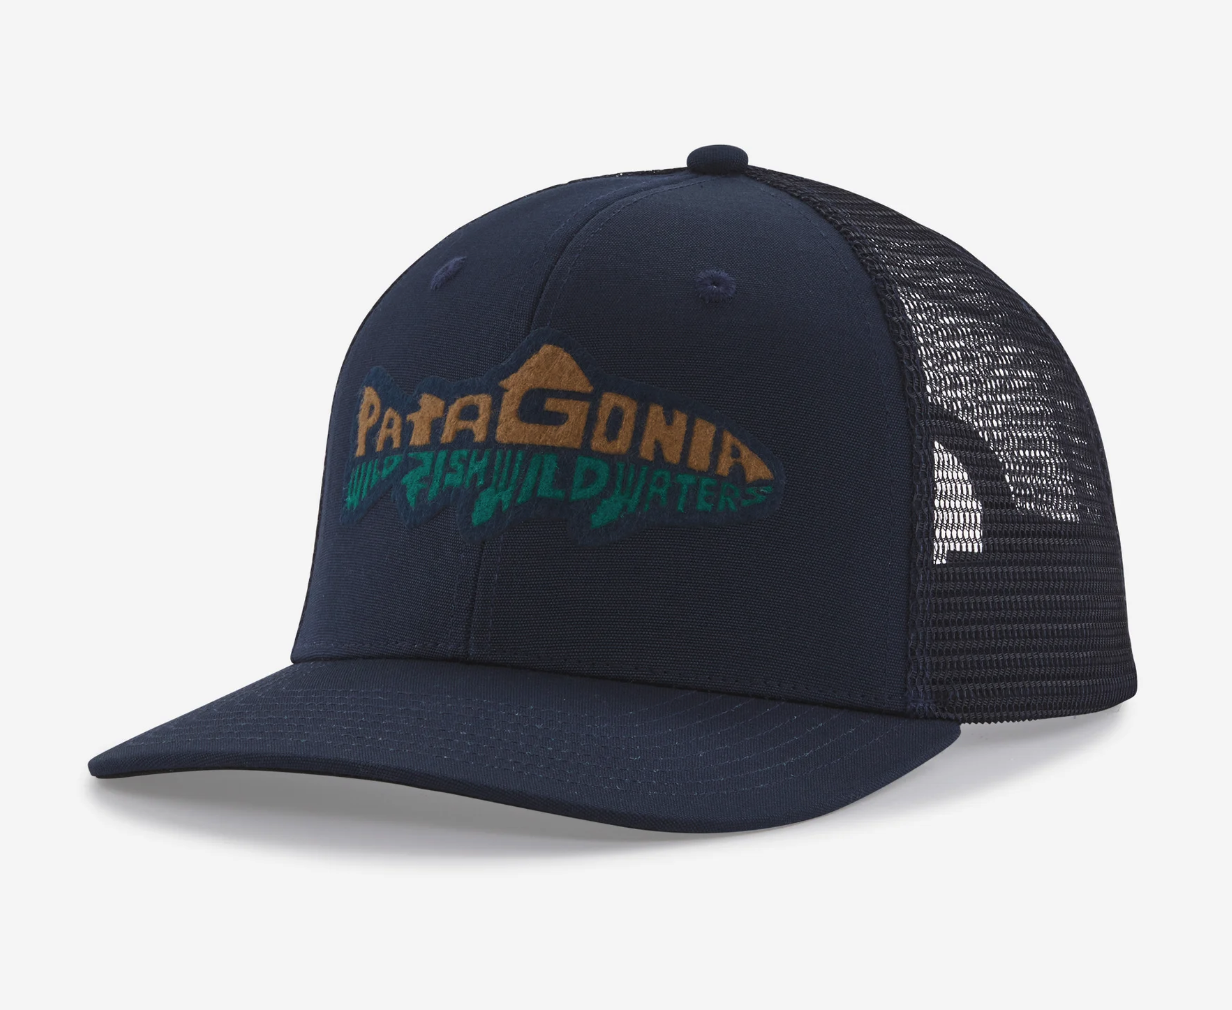 https://www.theflyfishers.com/Content/files/Patagonia/TakeAStandTrucker38356/NEWI.png